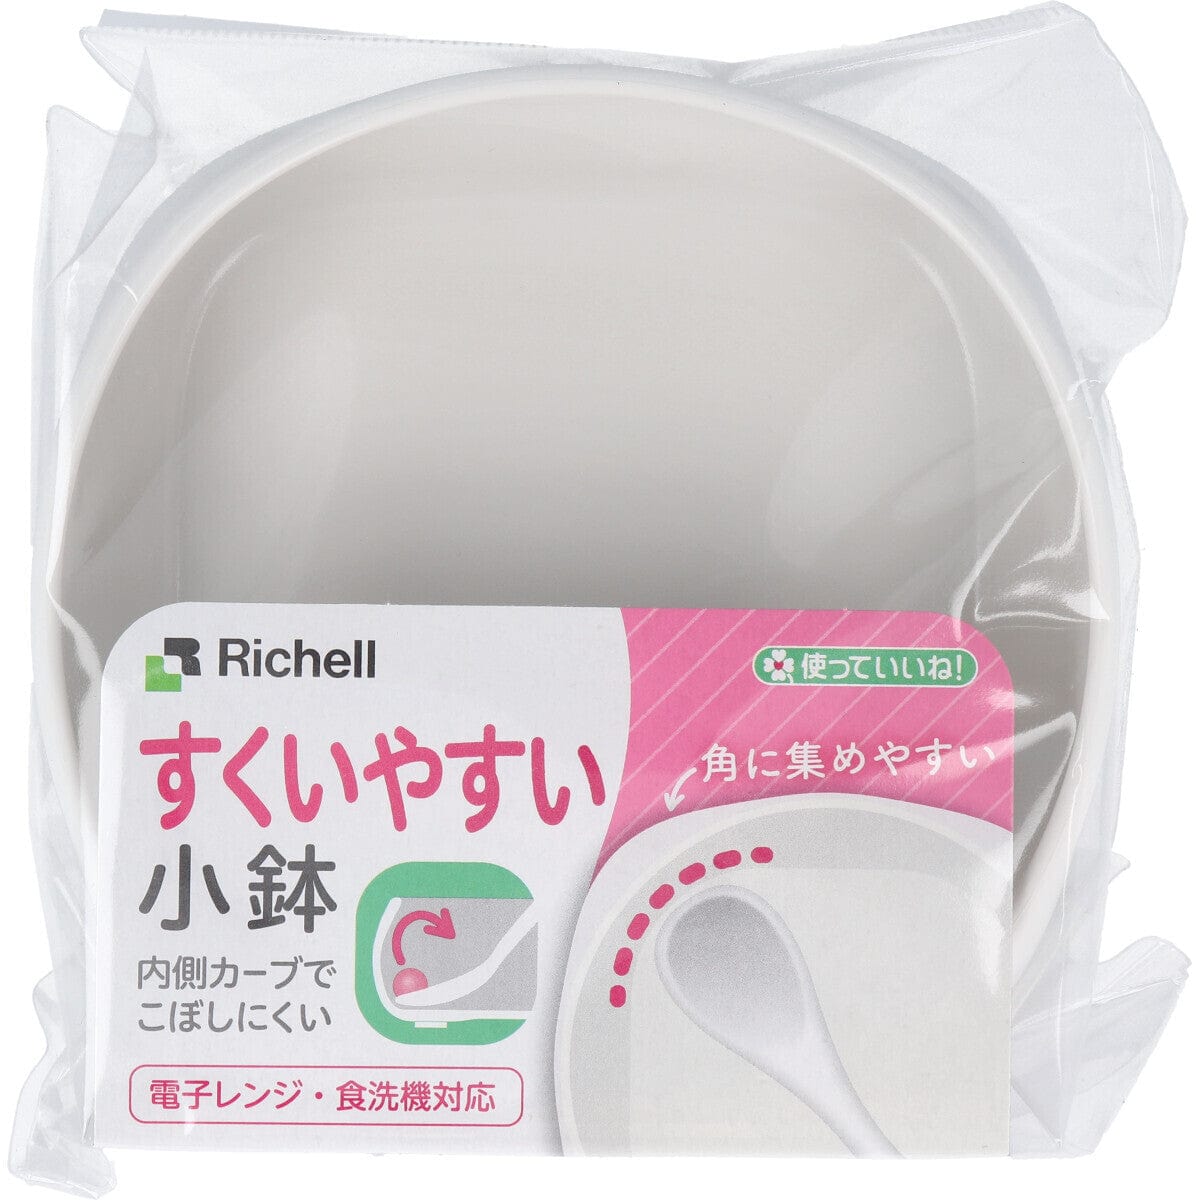 Richell - You Can Use It Easy Scooping Small Bowl RC1004 CherryAffairs